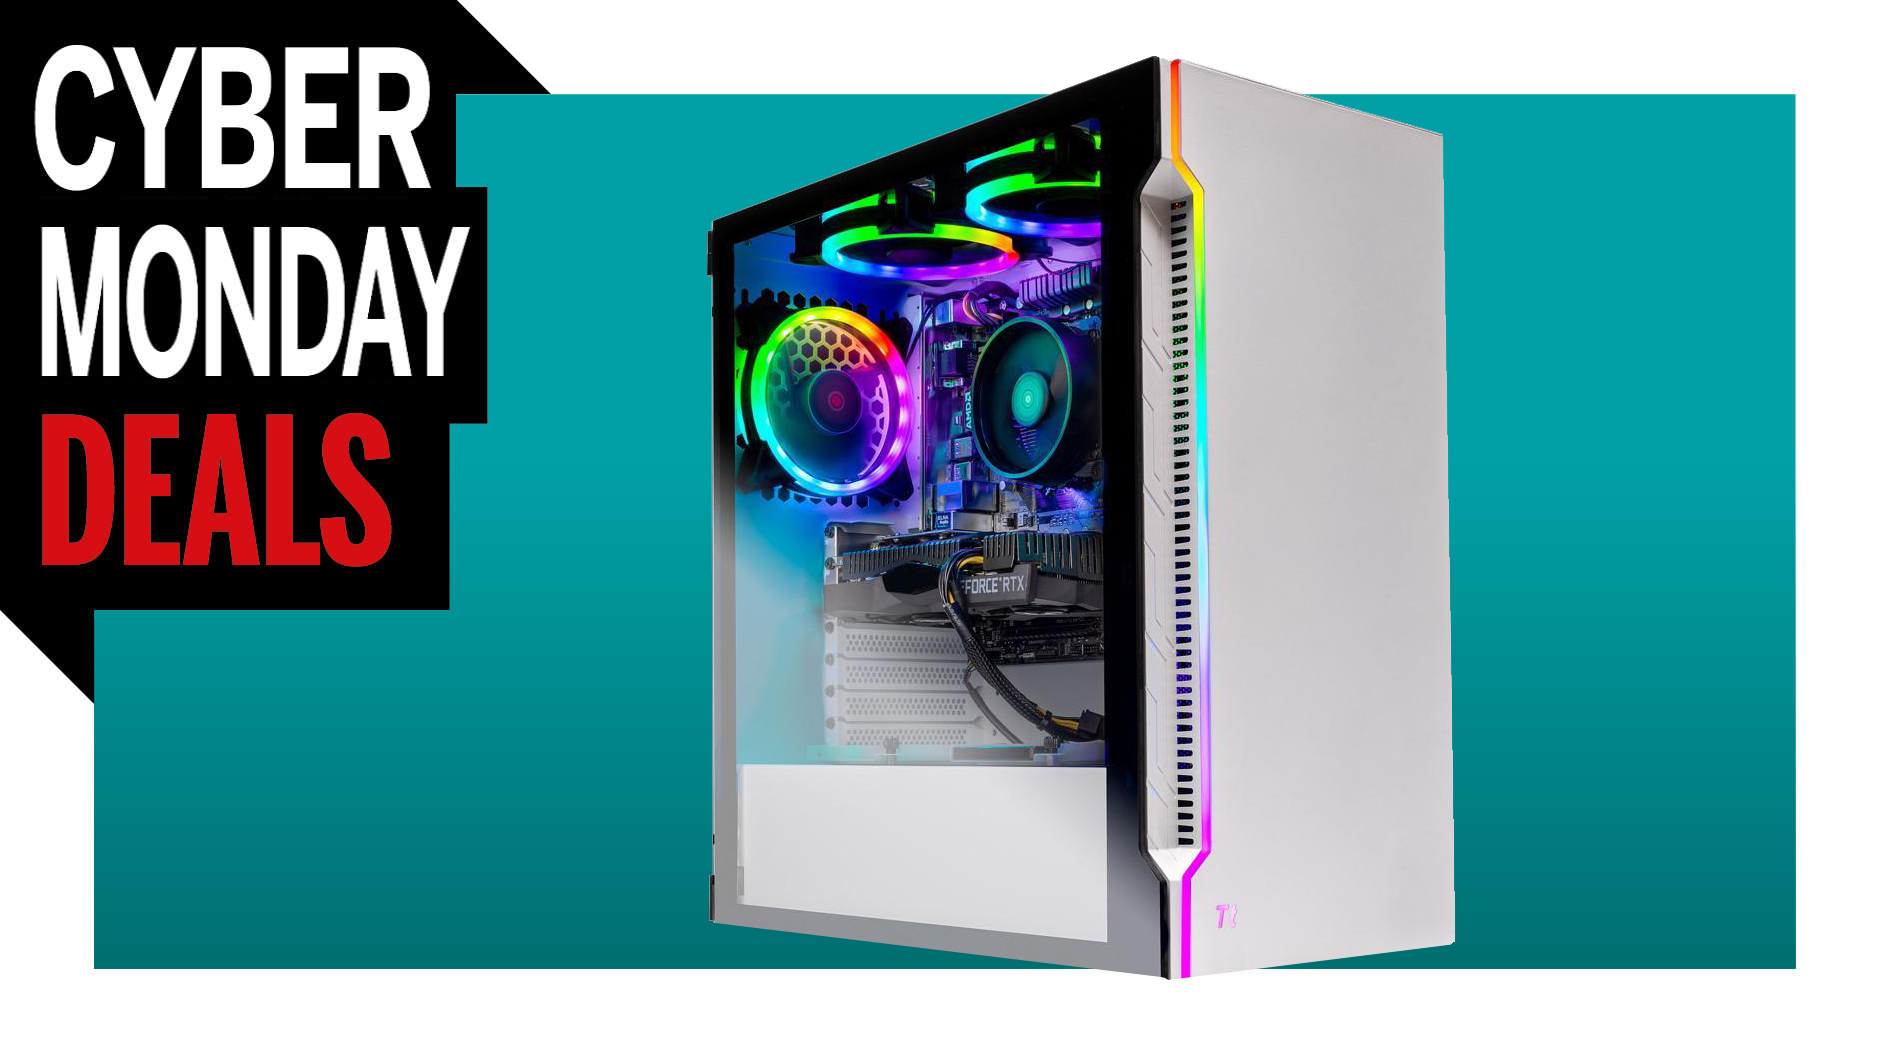  Get $300 off this gaming PC with an RTX 2060 graphics card 